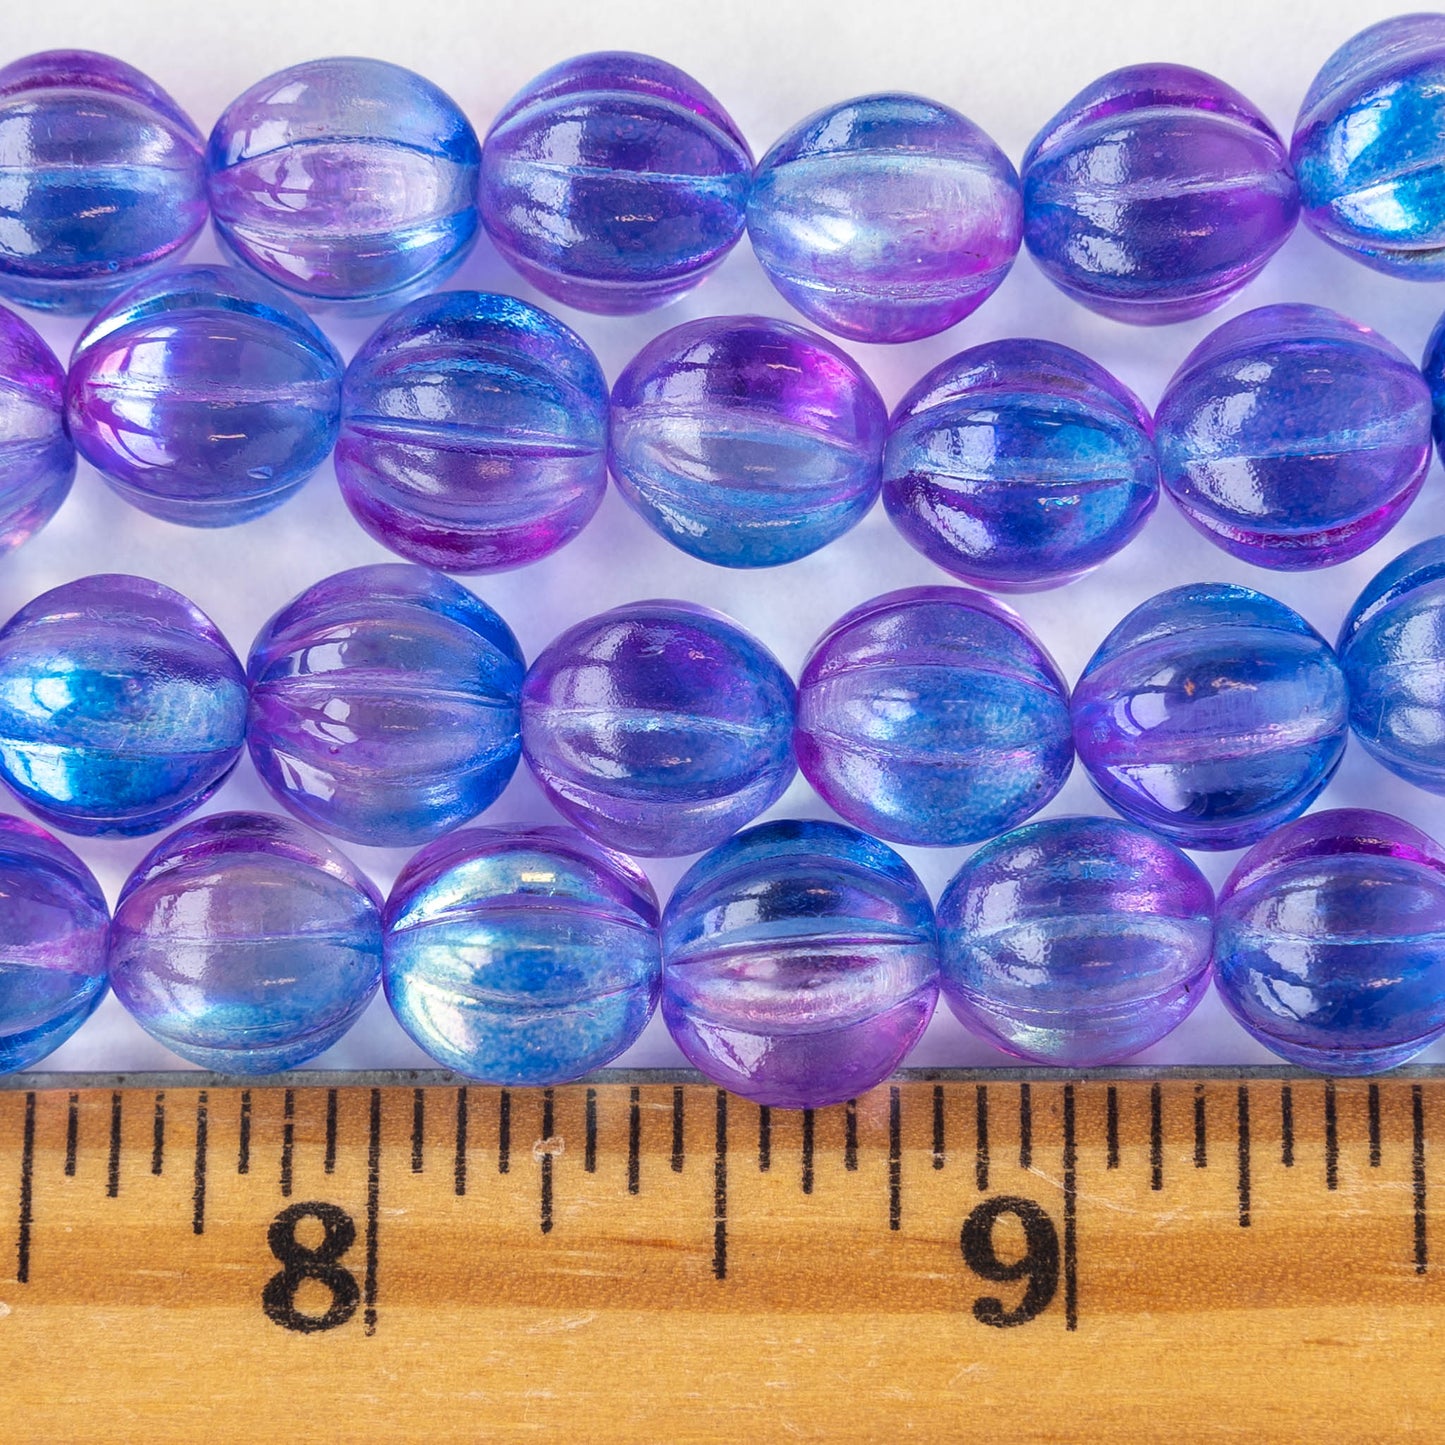 Set of 5 large “watercolor” marble beads in cool blue/purple tones